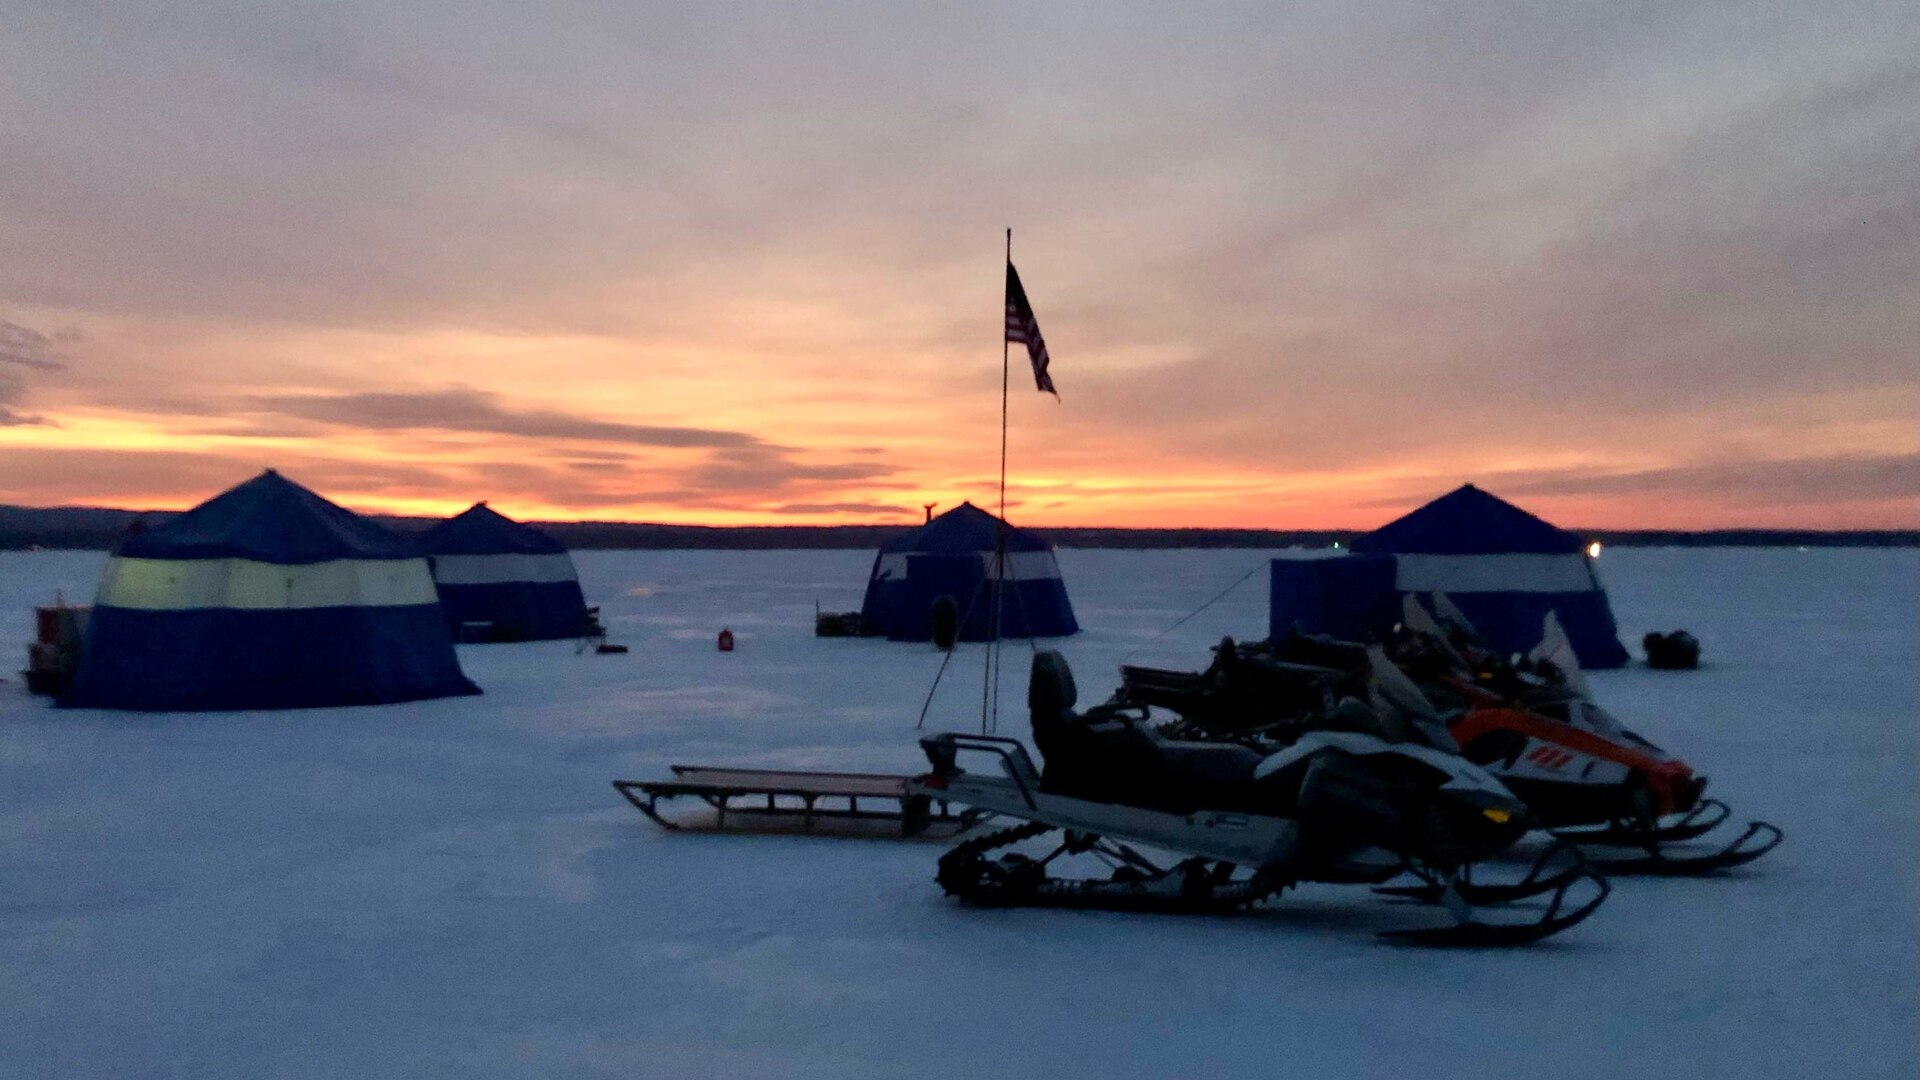 The sun sets over a camp erected on the ice of the Great Sacandaga Lake near Northville, New York, Feb. 15, 2022, by Airmen of the New York Air National Guard's 109th Airlift Wing. The Airmen were training on the tasks involved with creating an ice "ski-way" to land massive ski-equipped LC-130 Hercules aircraft on ice in the polar regions.